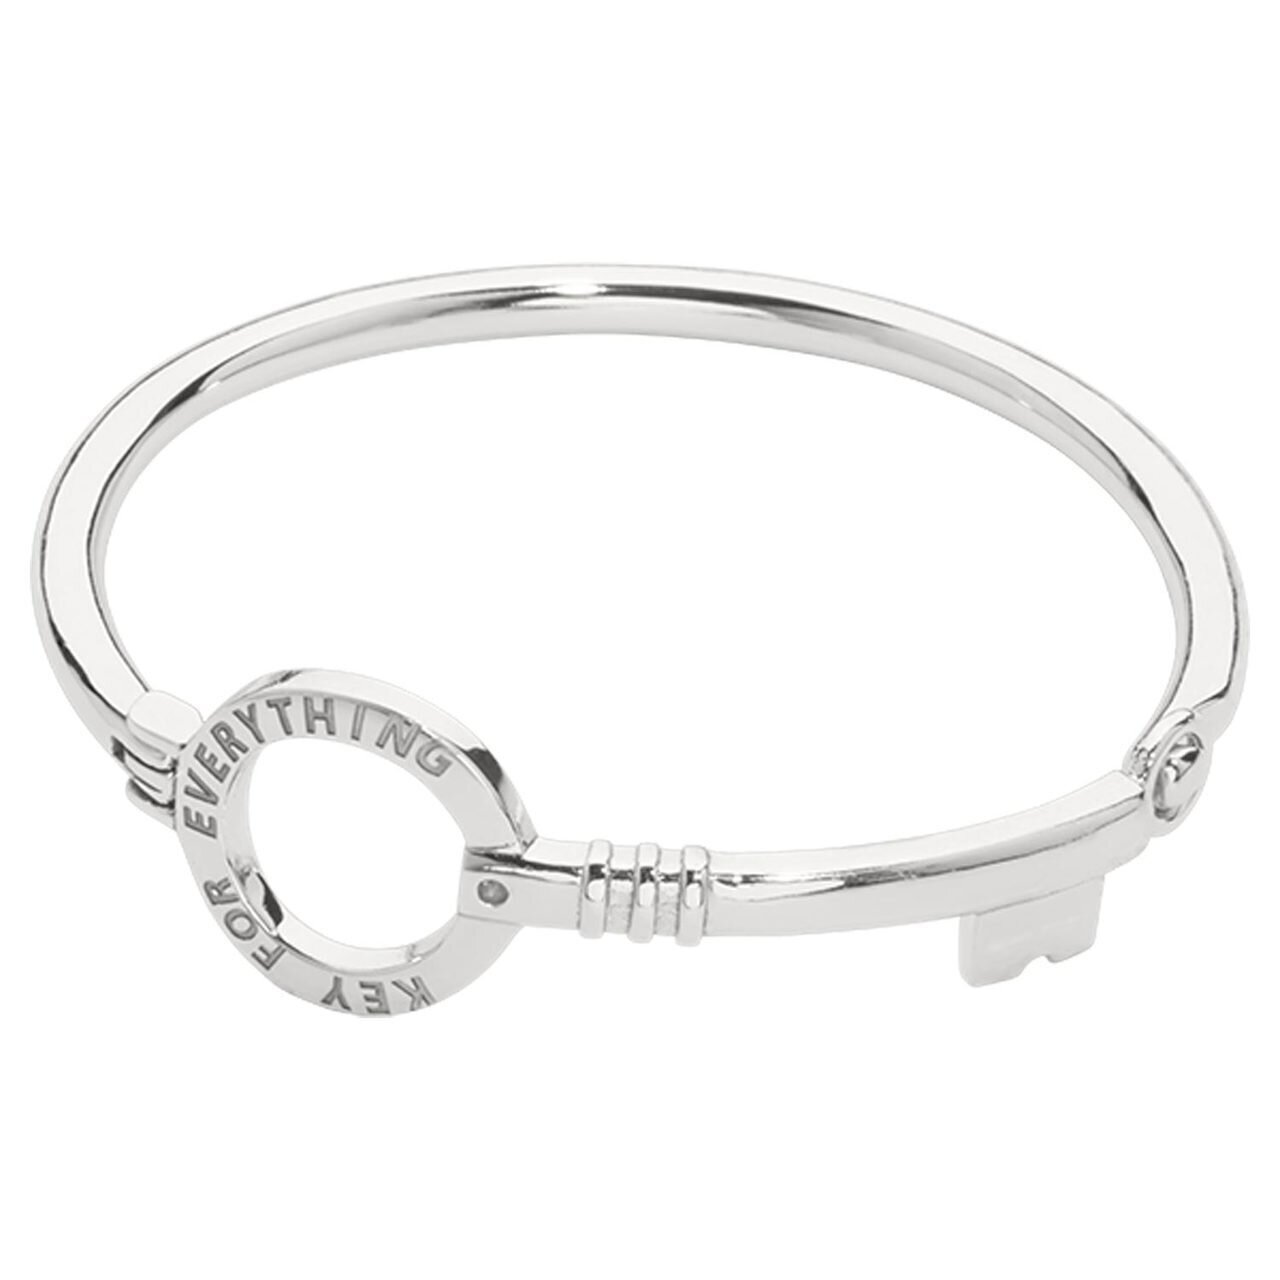 Nikki Lissoni Bracelet with Key To Everything Tag Silver-plated 17cm B1135S17